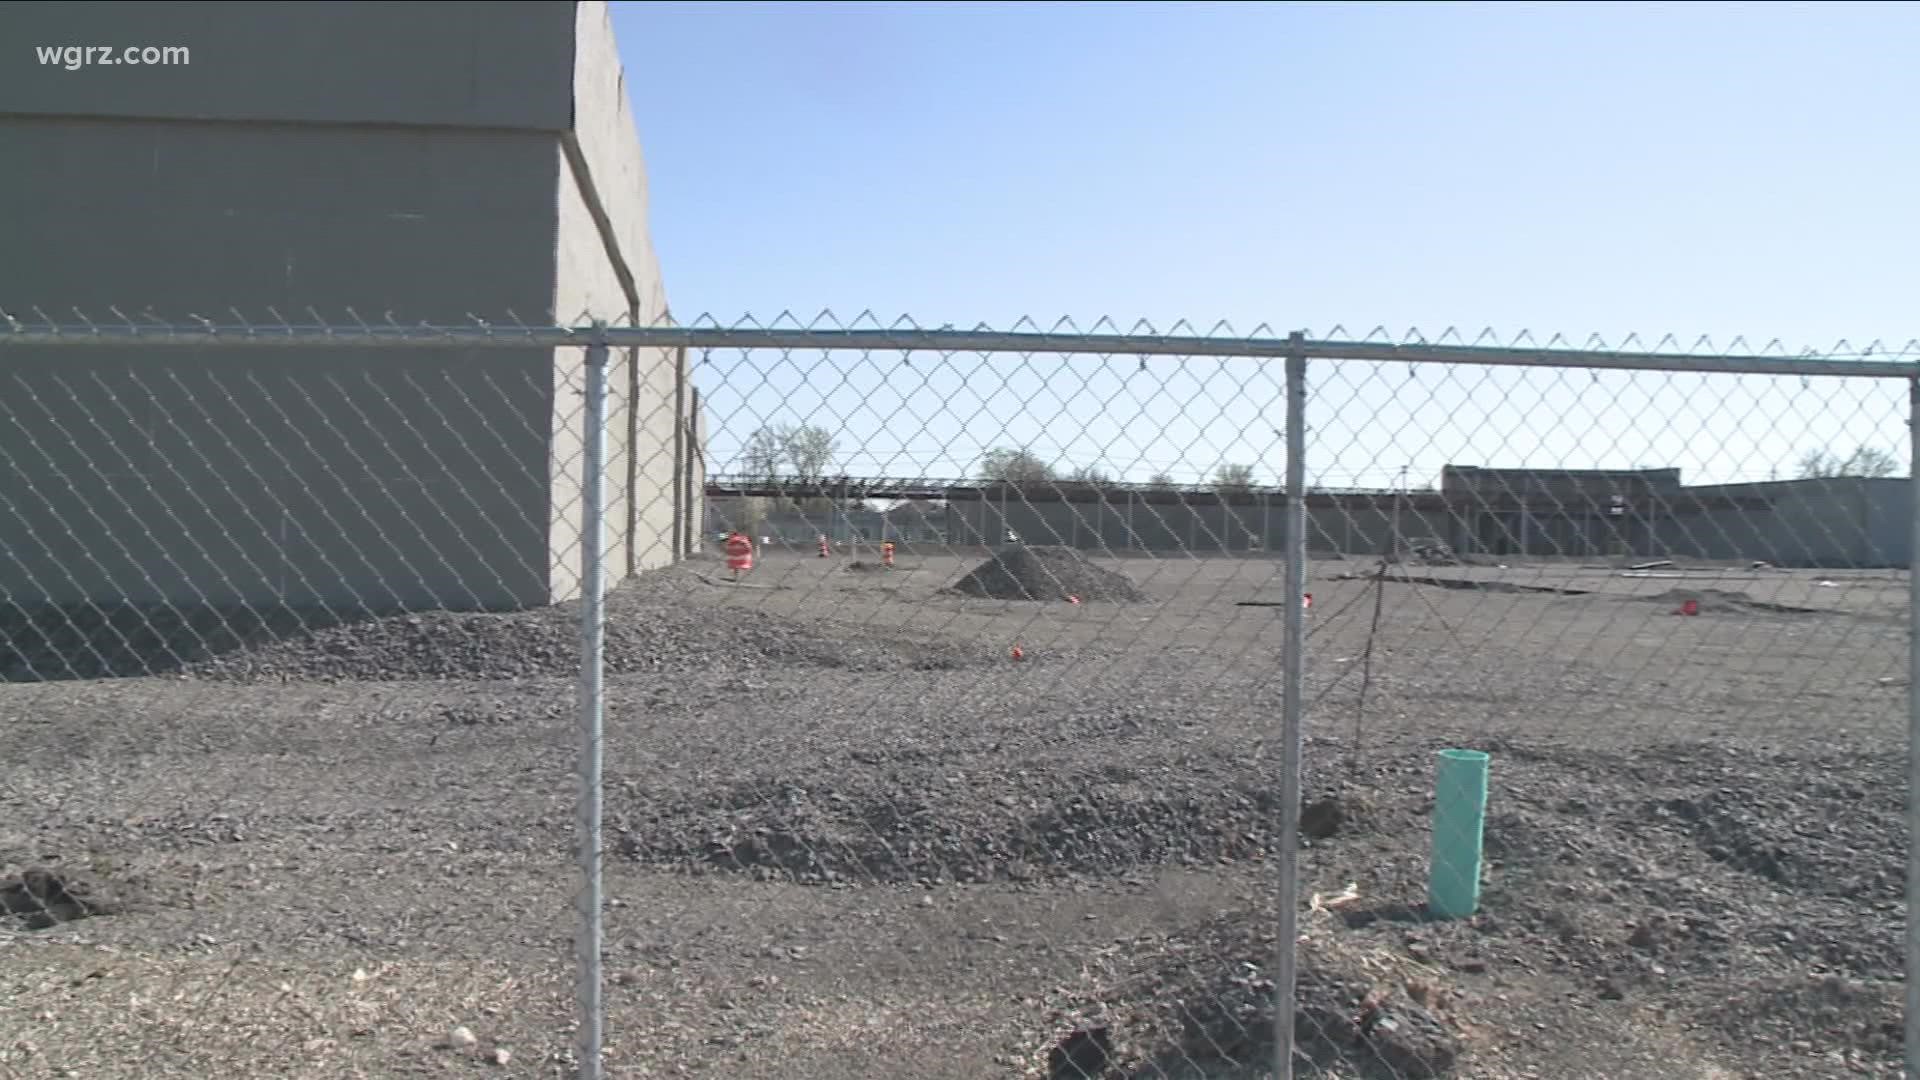 The major re-development project in the works for the former Northtown Plaza still has no activity on its site that was planned to become 'Station 12.'